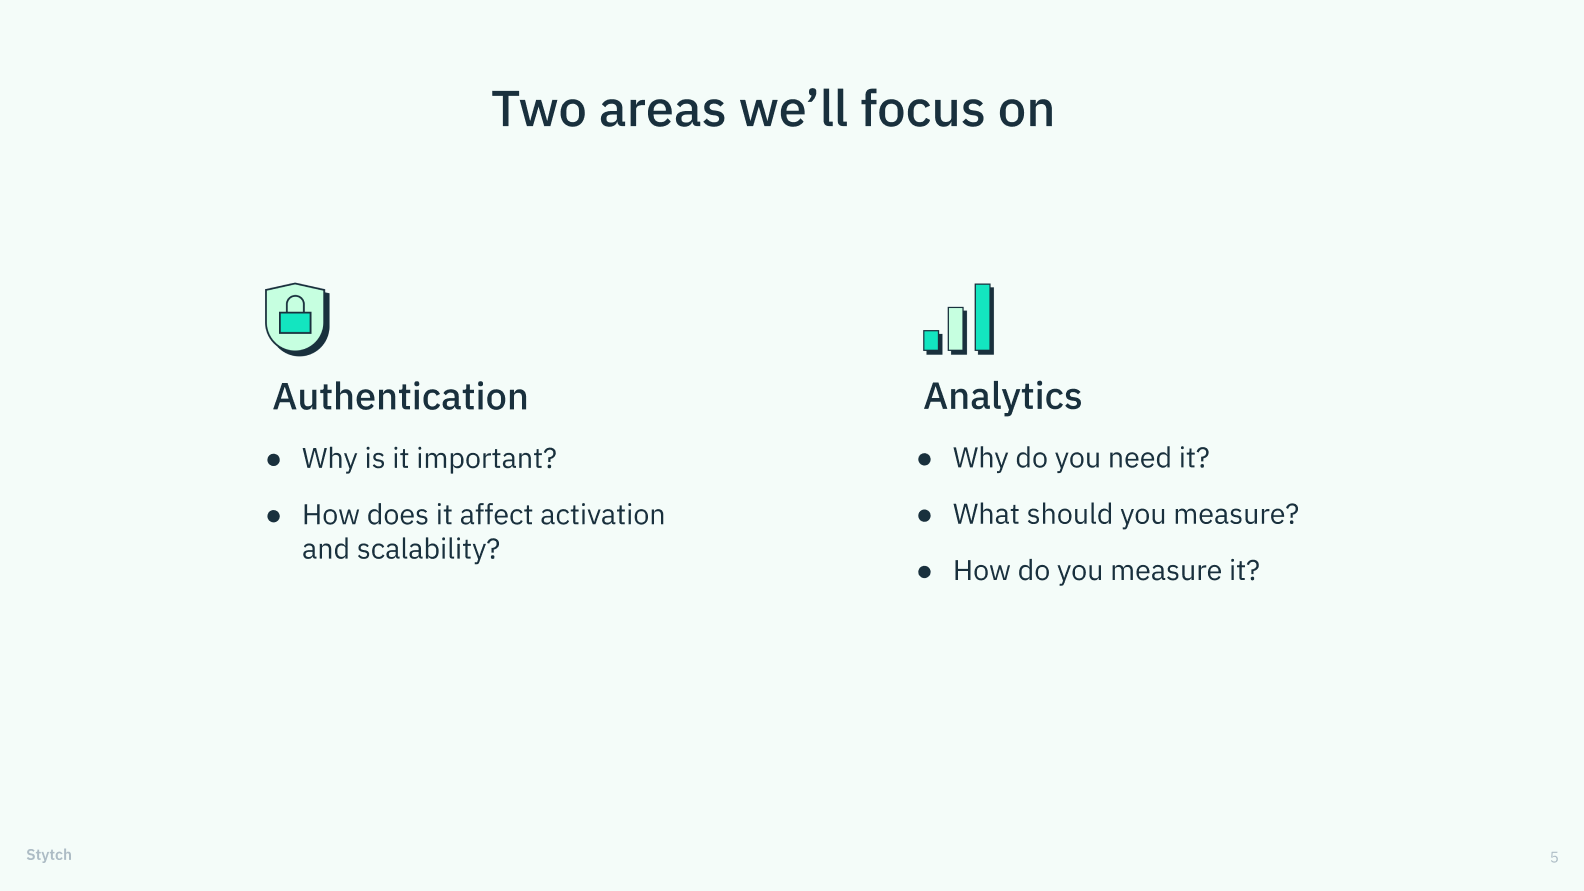 On a light-green background, the text "Two areas will focus on: Authentication + Analytics"